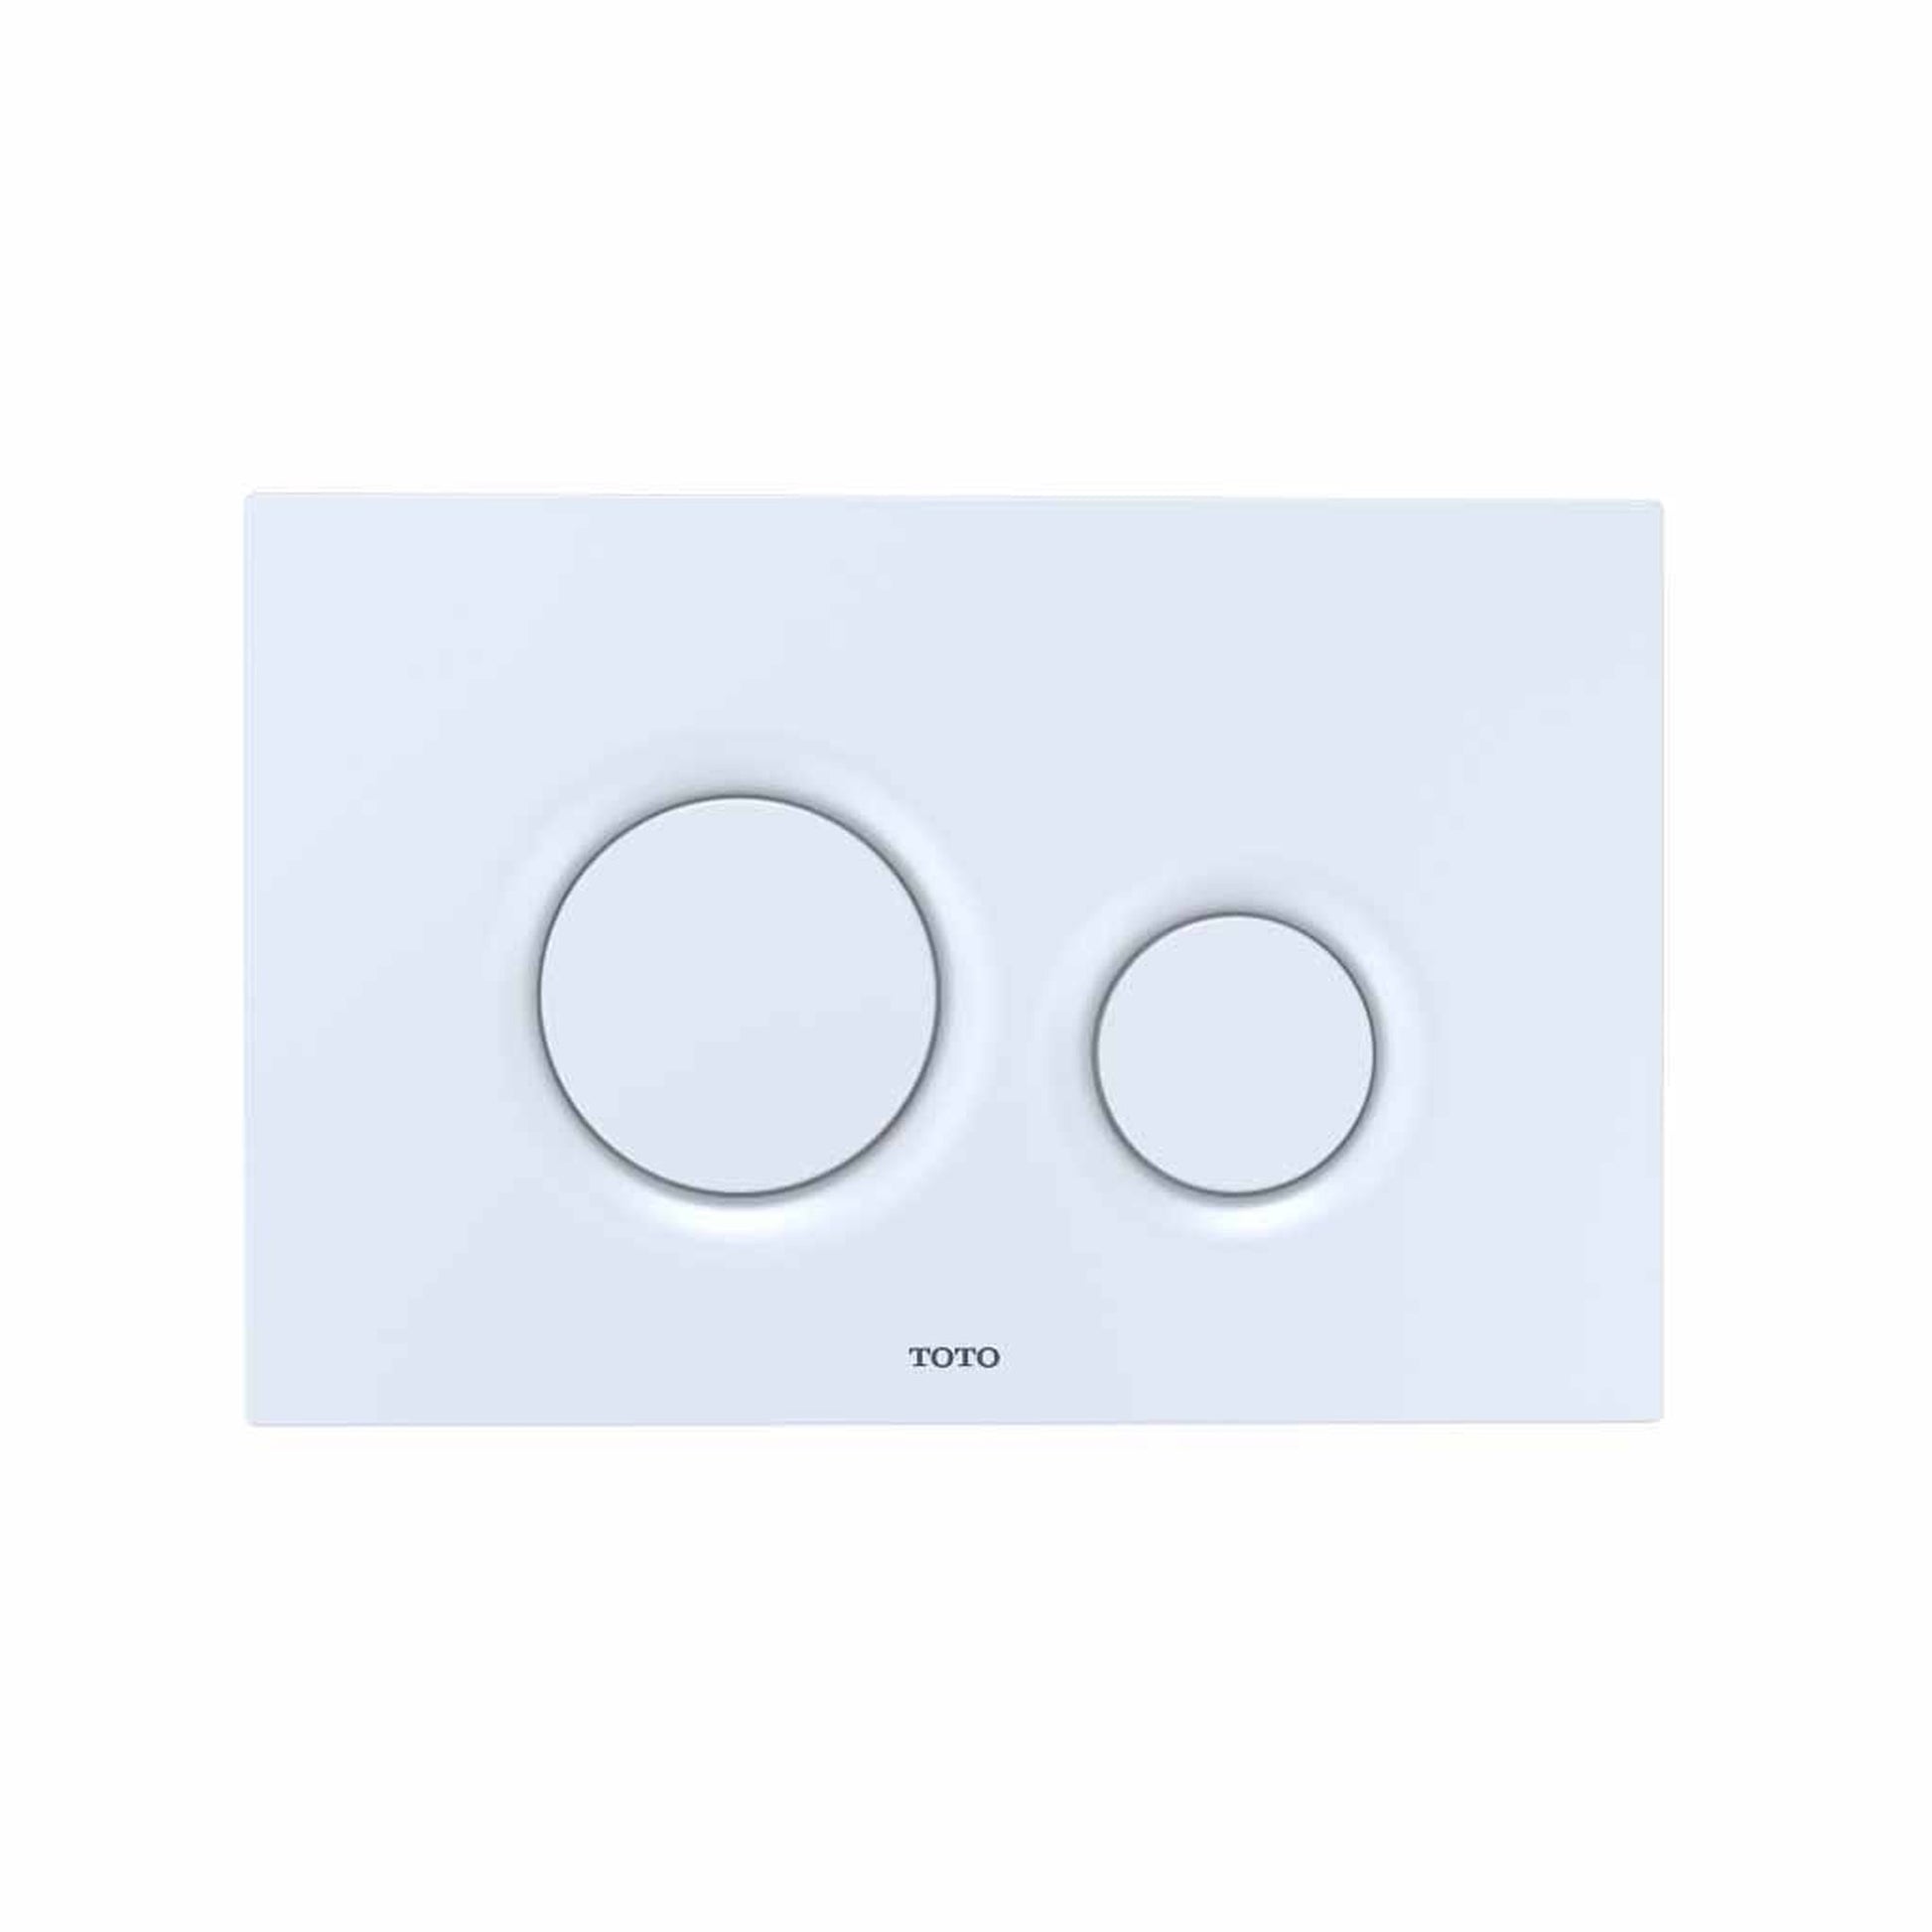 TOTO AP Wall-Hung 1.28 GPF & 0.9 GPF Dual-Flush Elongated Toilet With Duofit In-Wall Tank Unit and White Push Plate